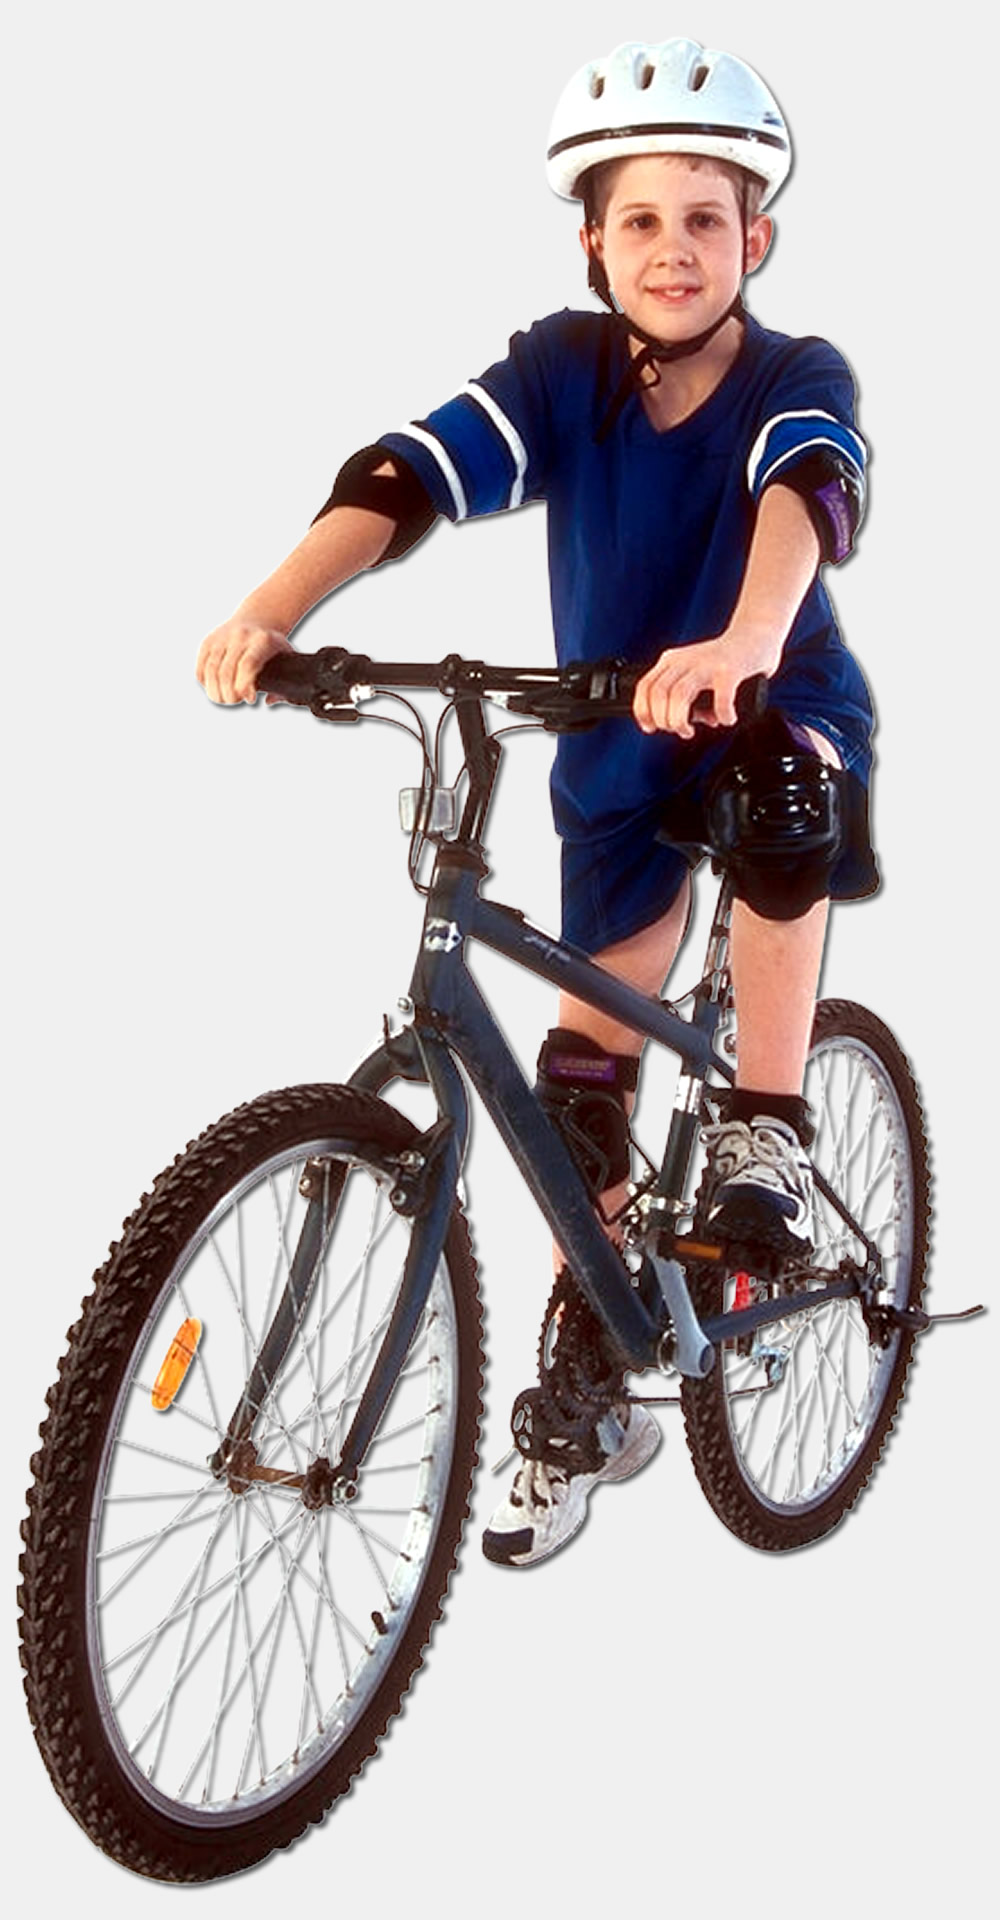 the divergent thinker boy on a bicycle